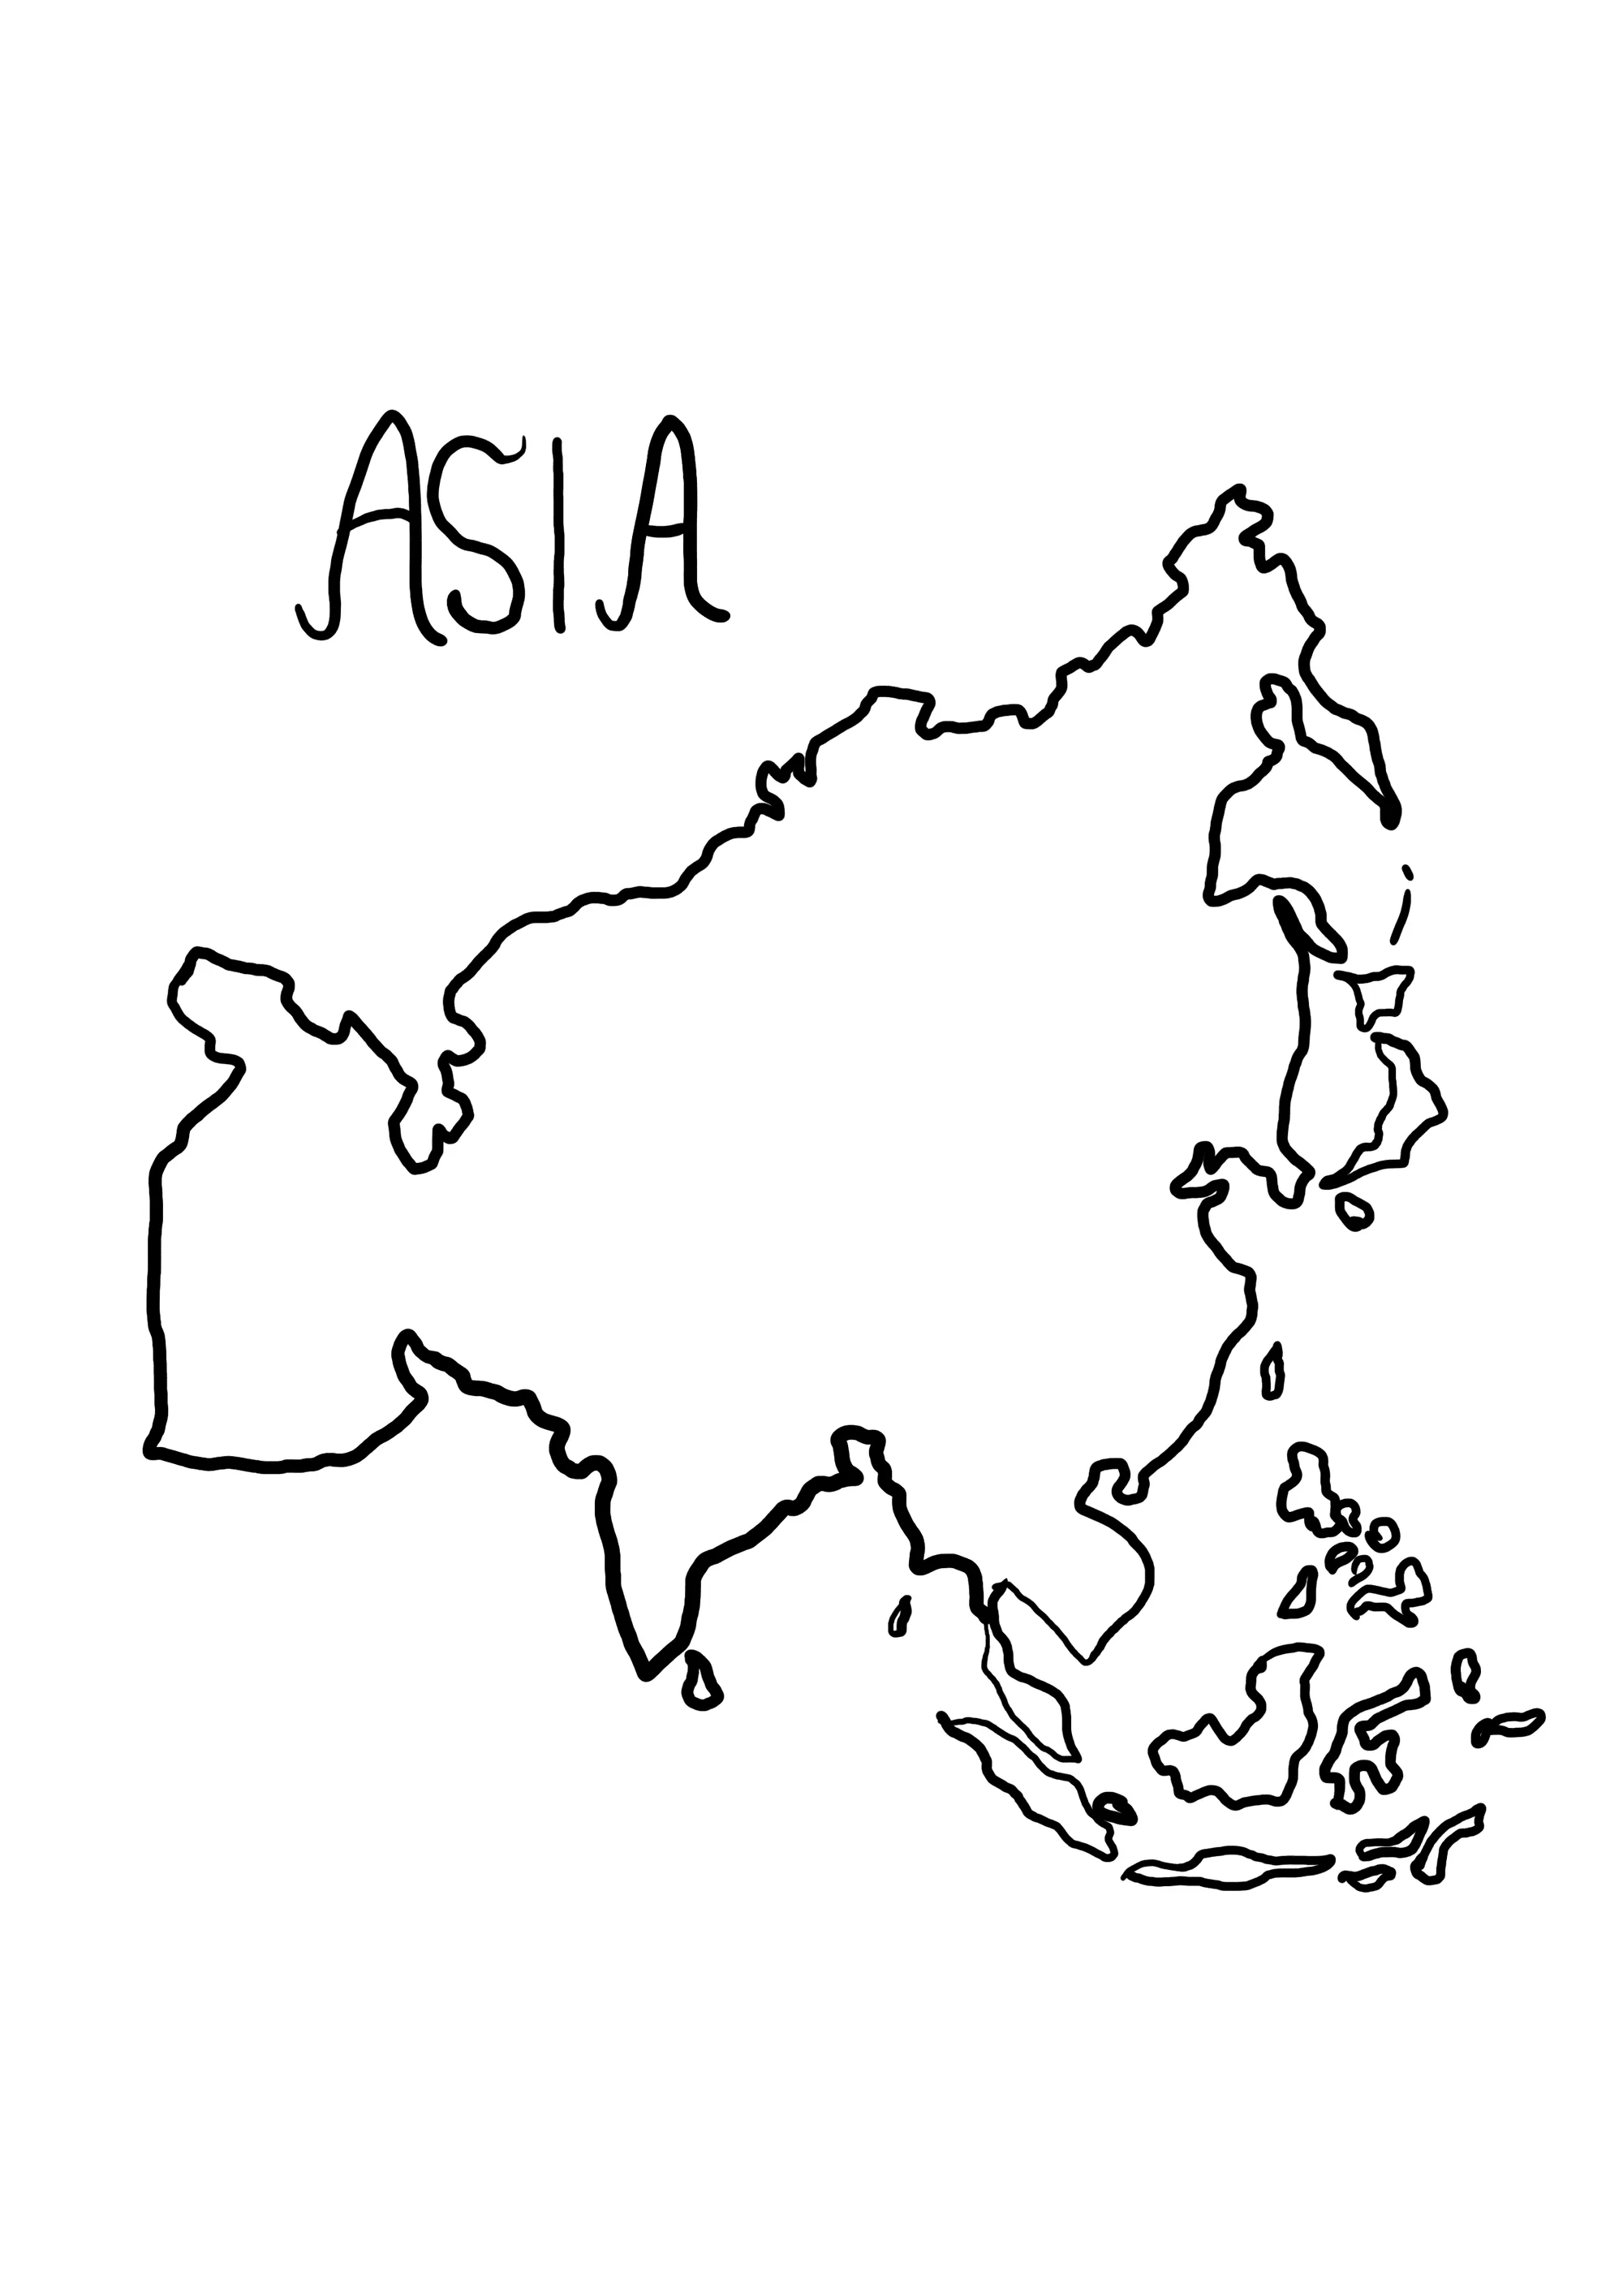 Map Of Asia Coloring Pages   Free Maps Coloring Pages   Kidadl